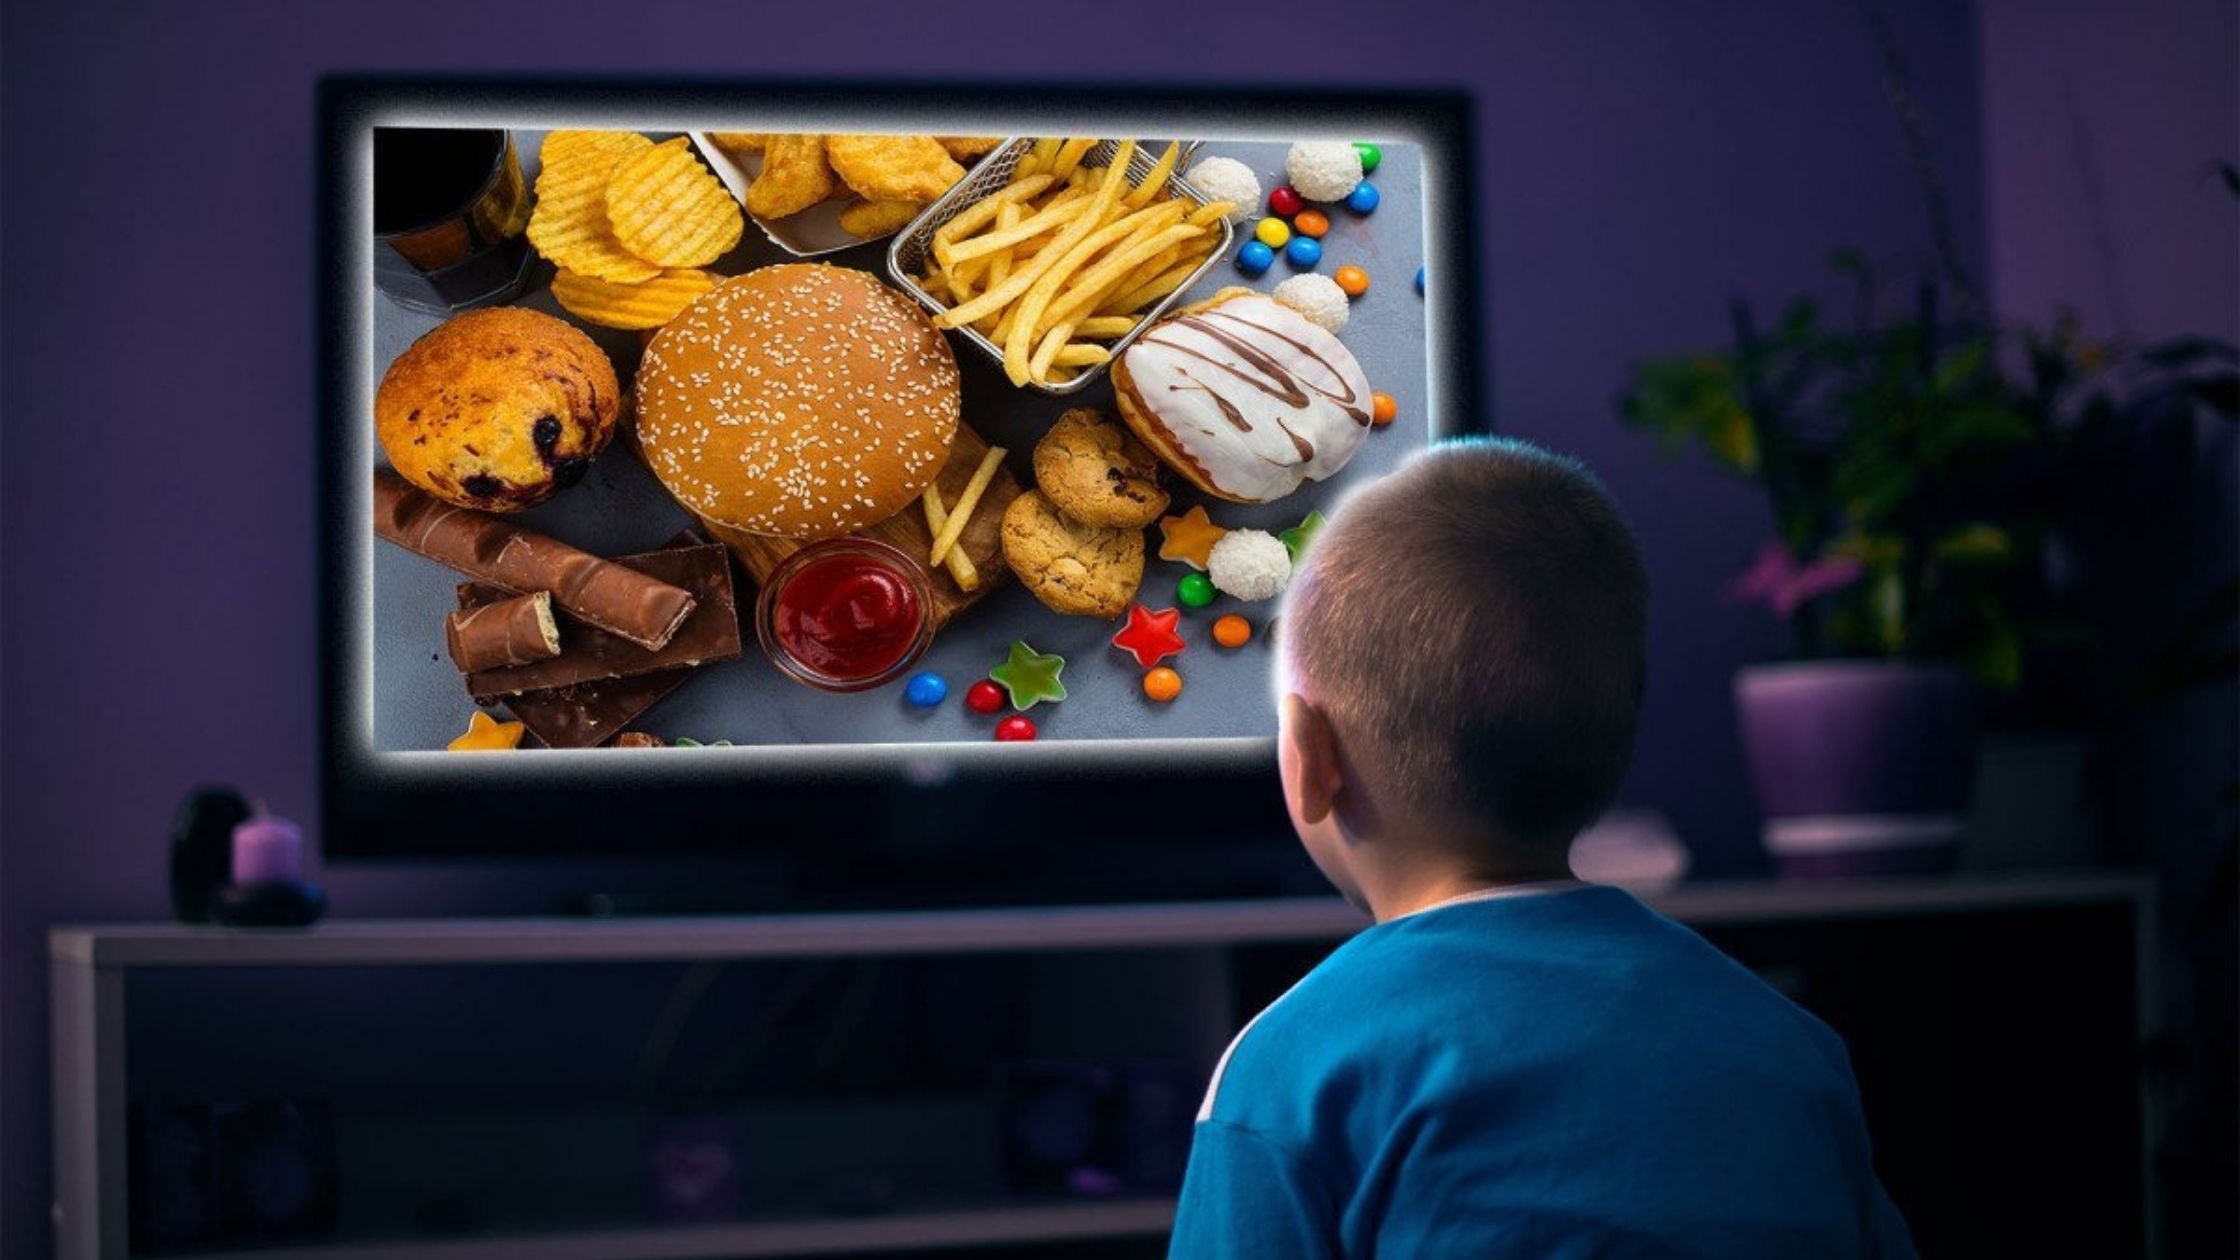 Food-related television advertisements linked to childhood obesity